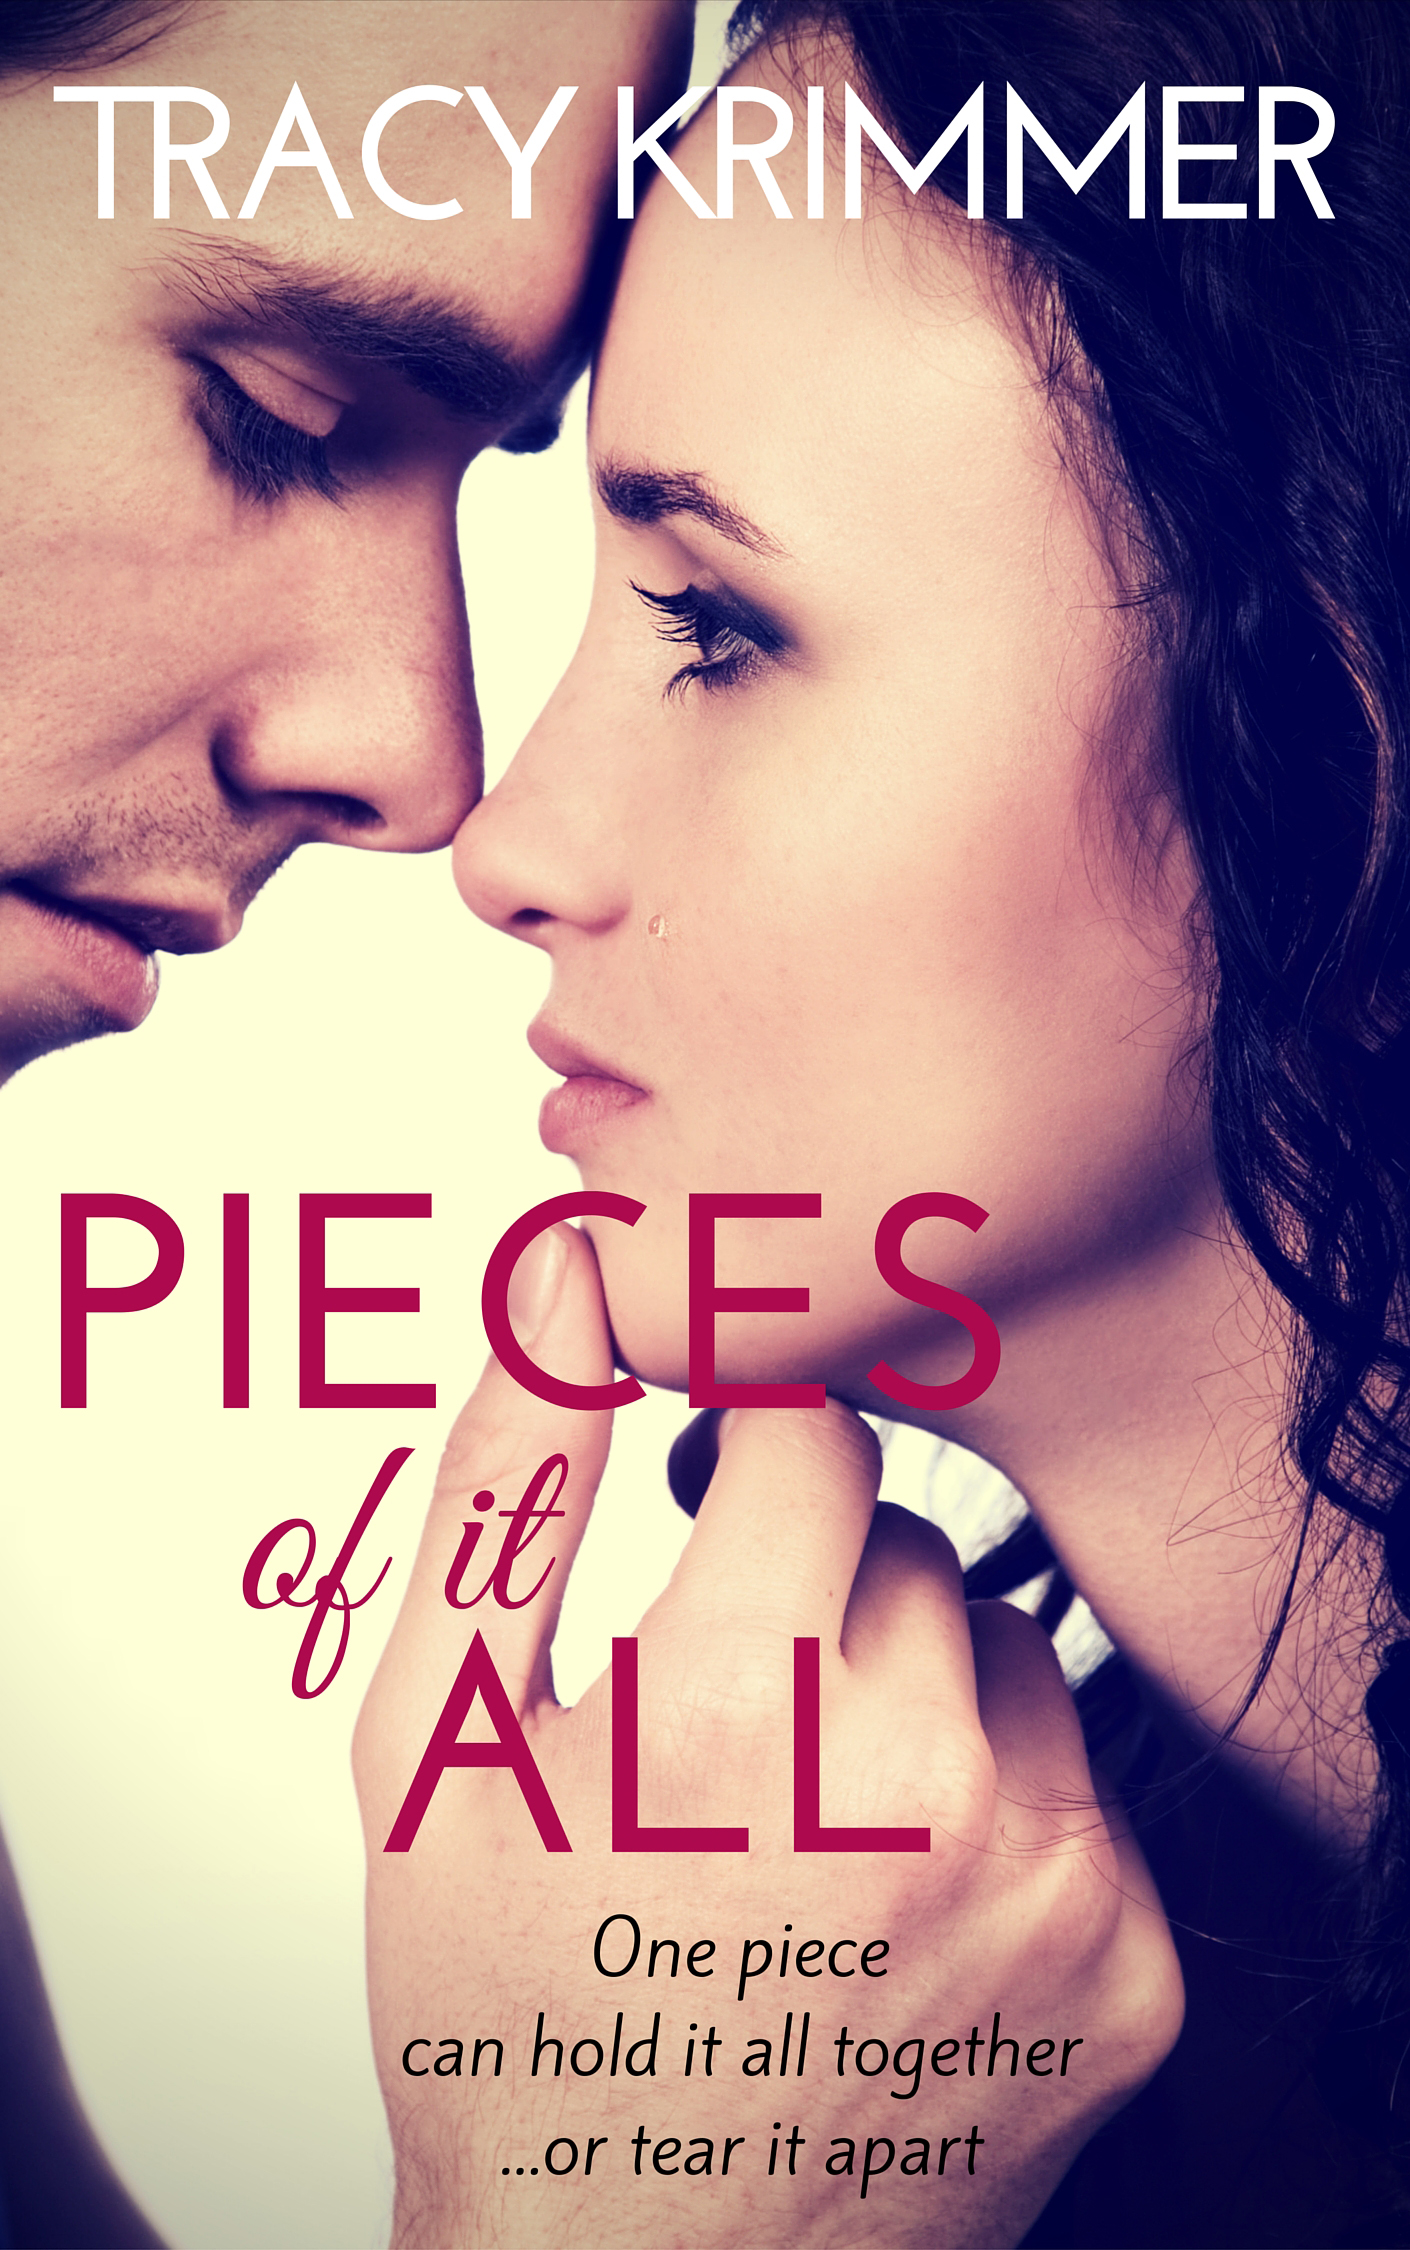 Pieces New Cover Final_edit.jpg